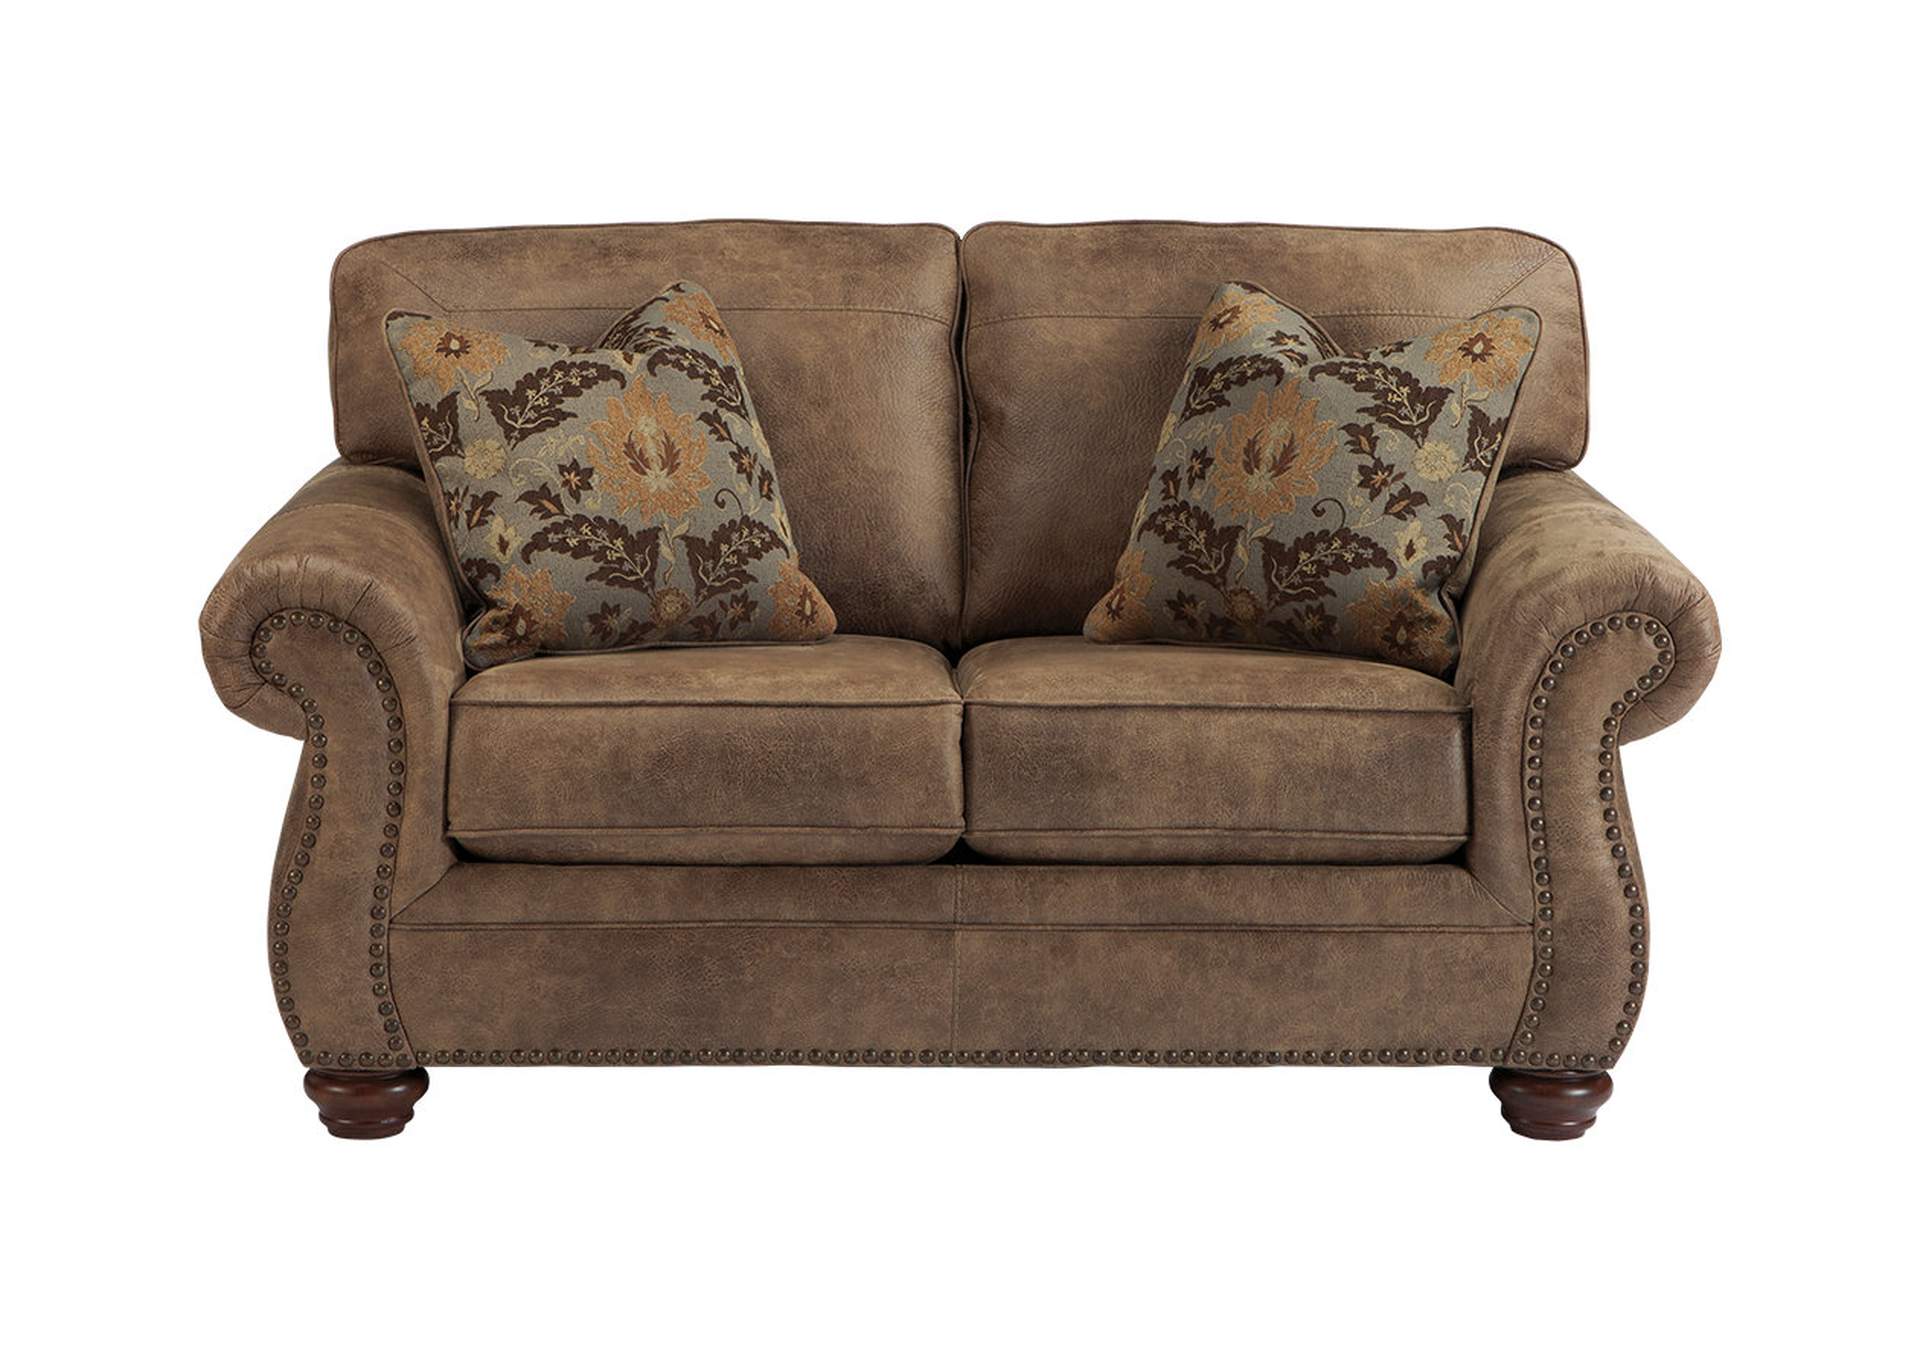 Larkinhurst Sofa and Loveseat with Recliner,Signature Design By Ashley